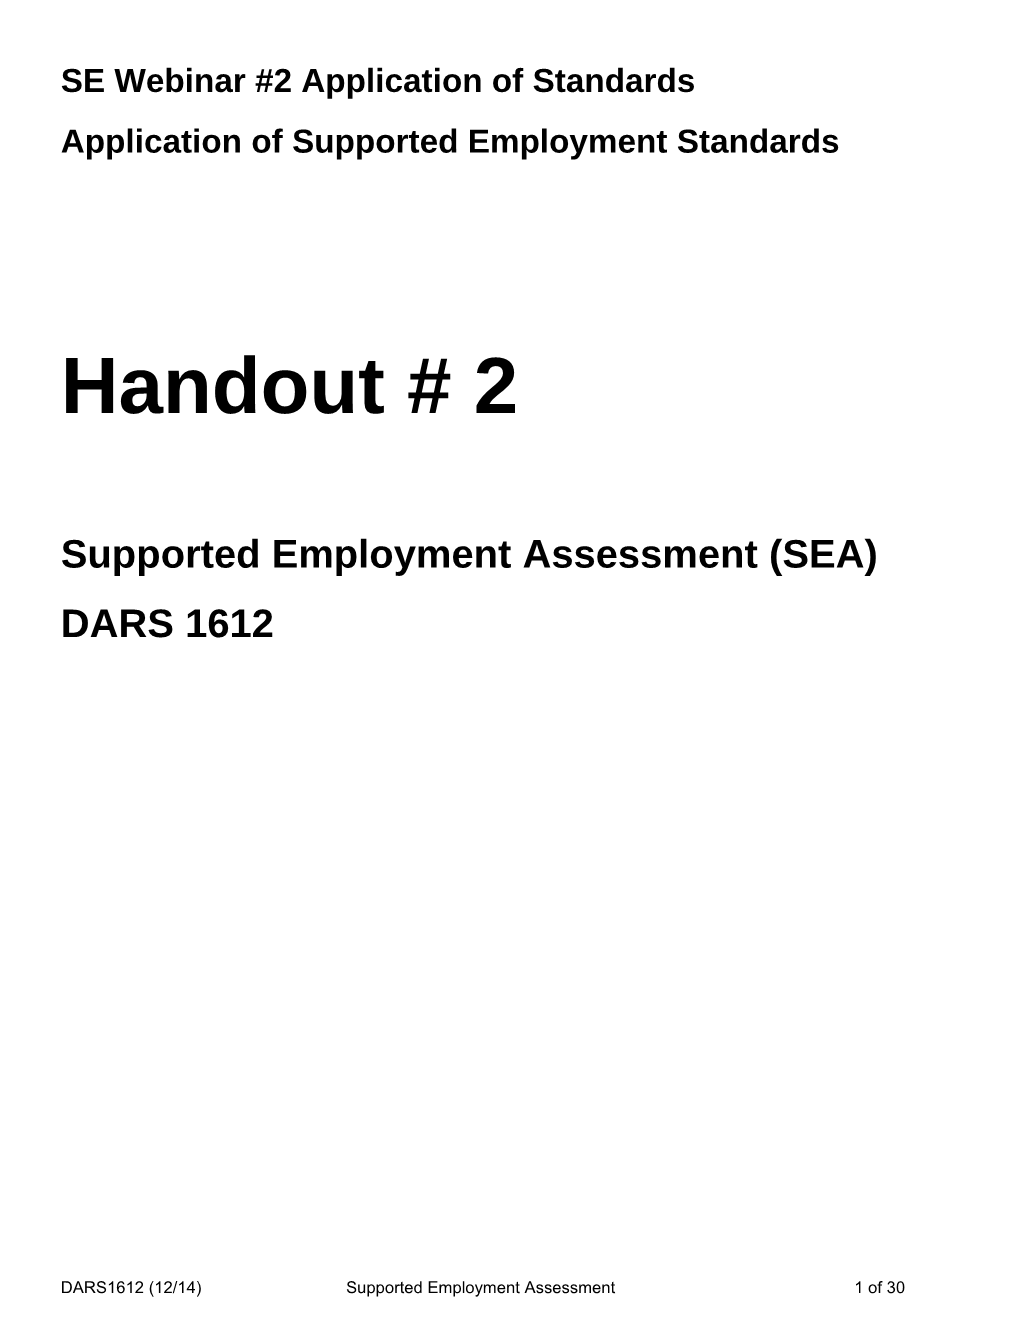 Application of Supported Employment Standards